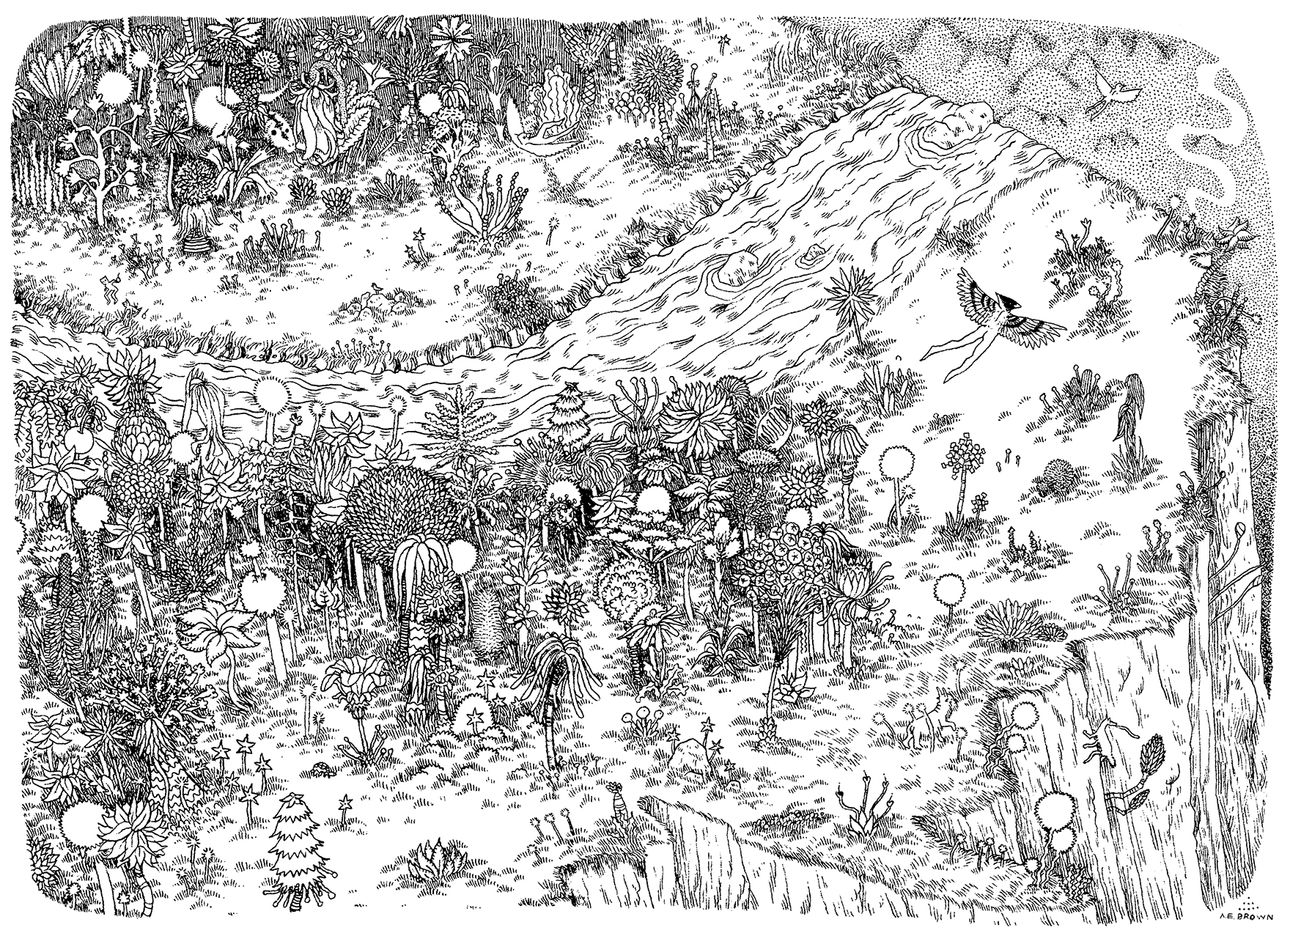 Black and white illustration of a forest on a cliff viewed from above